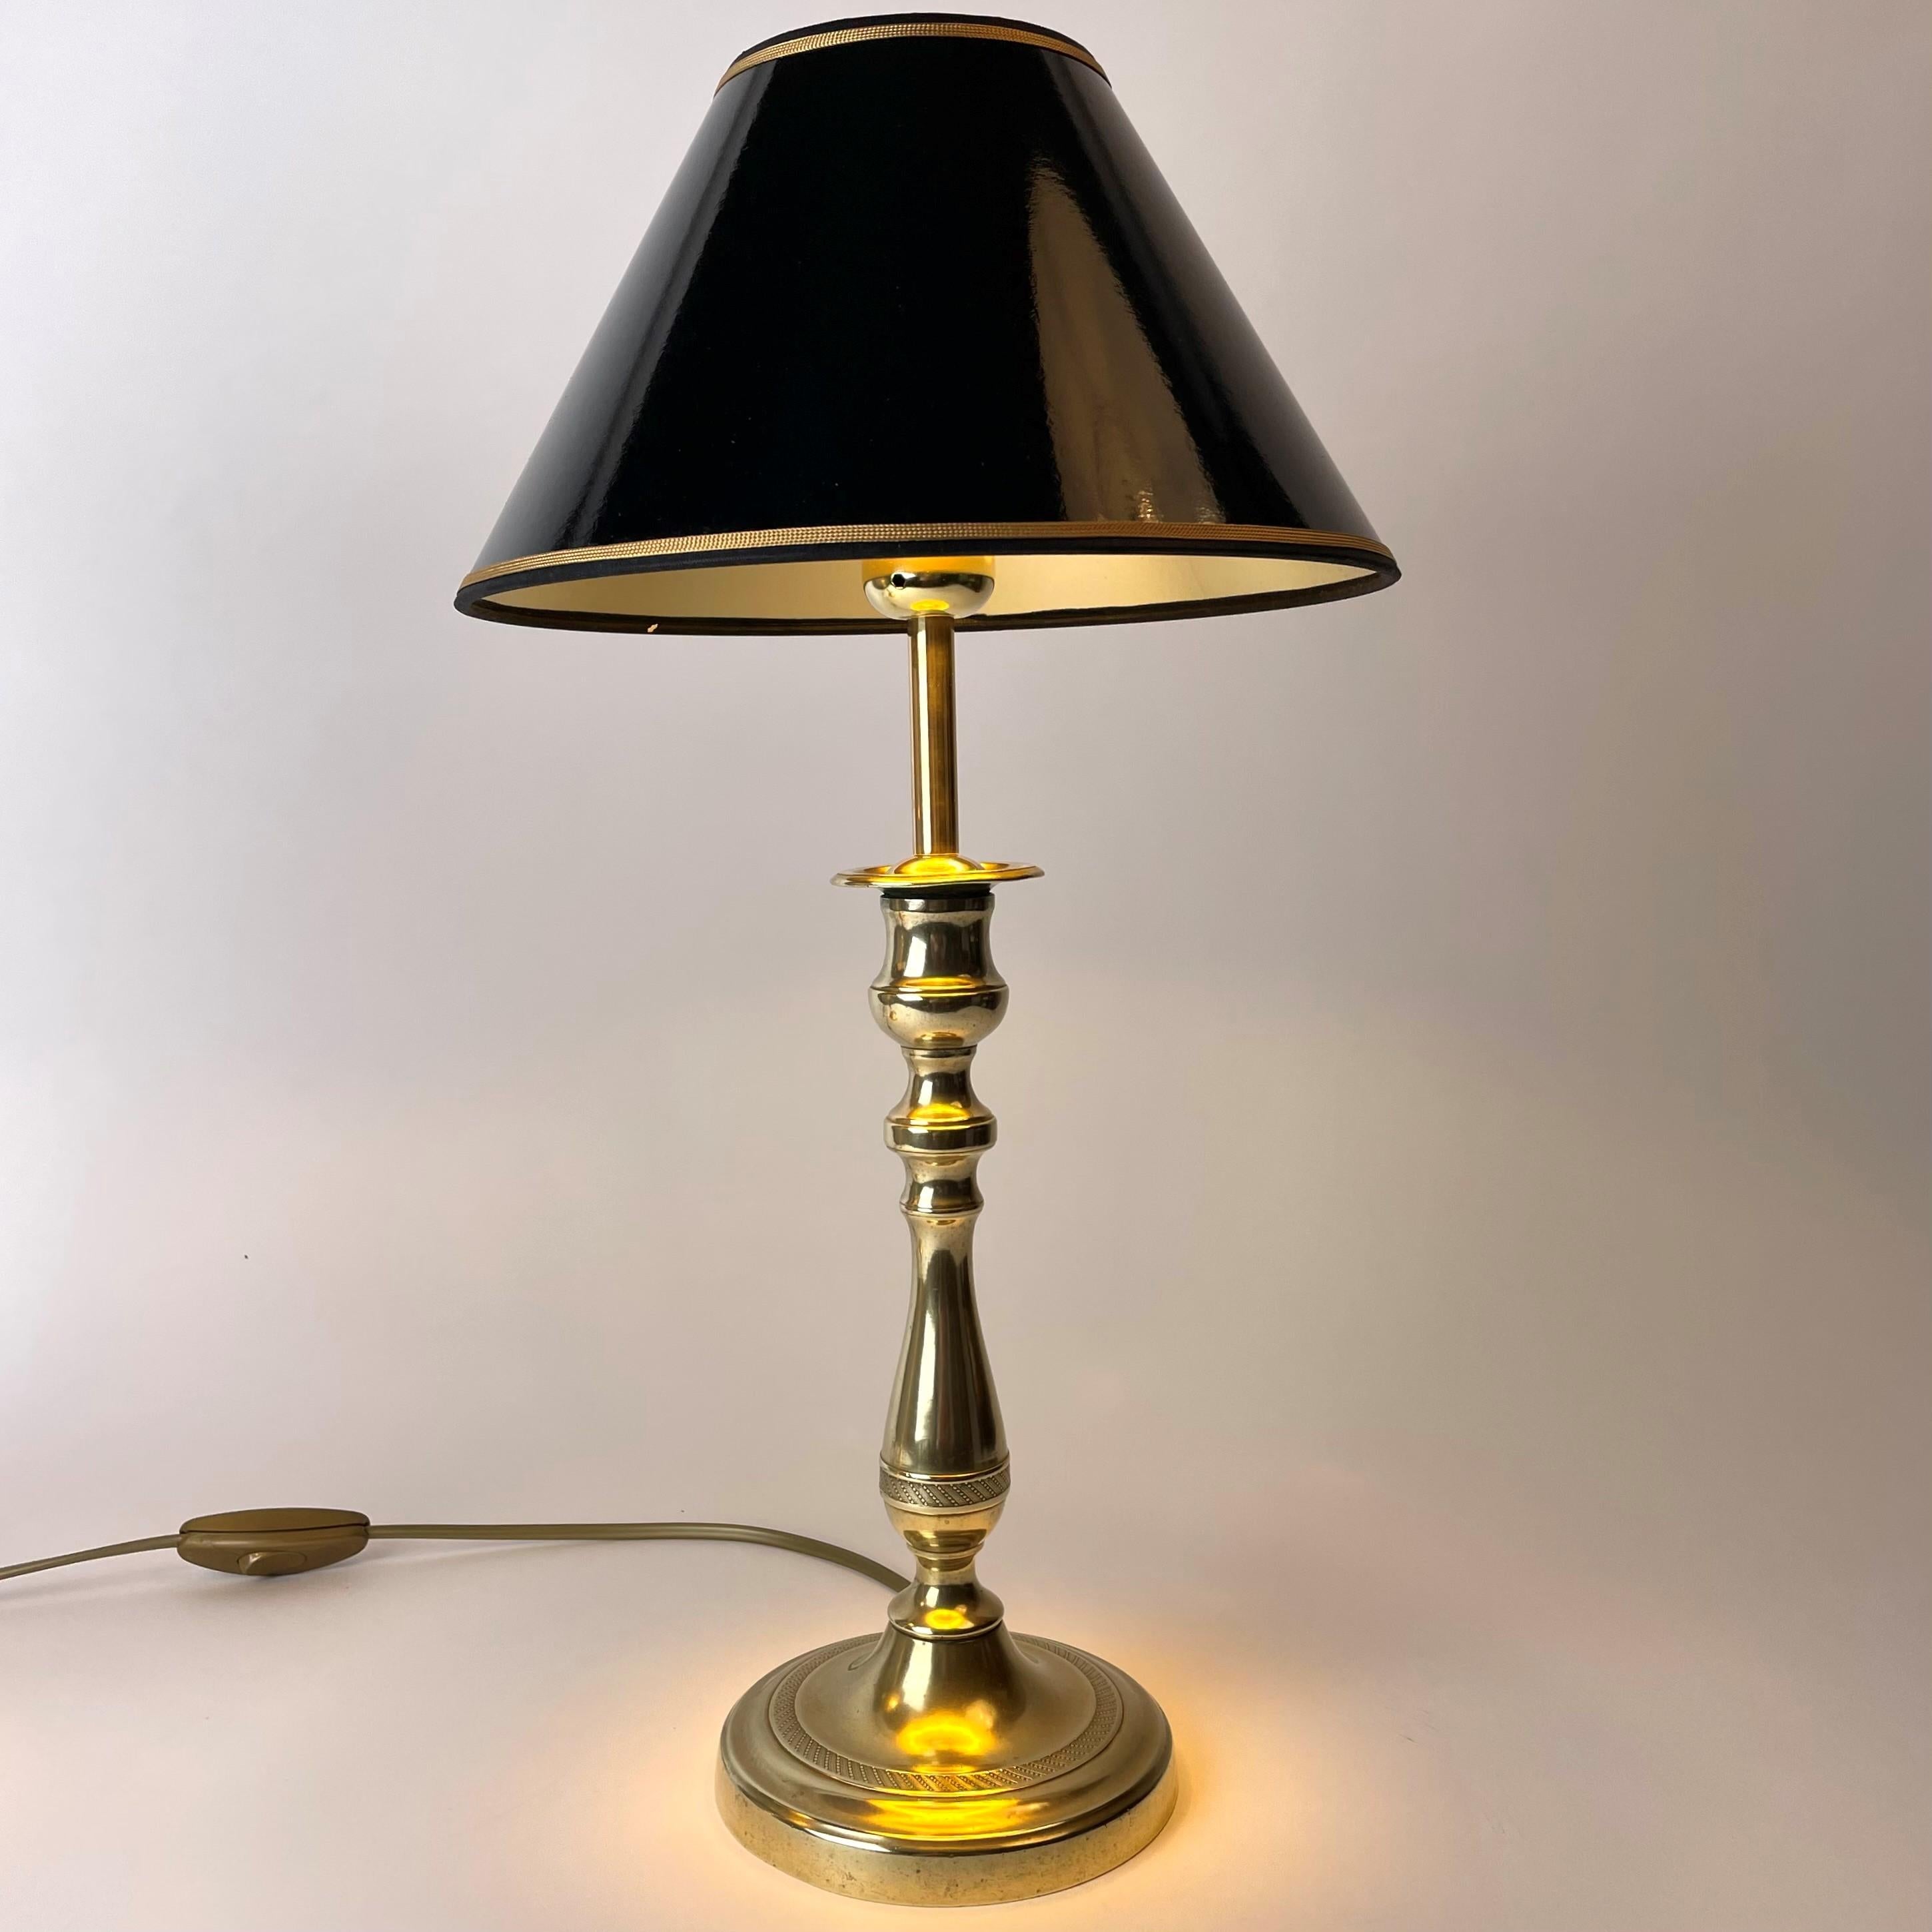 Mid-19th Century Pair of Table Lamps, Originally Empire Candlesticks